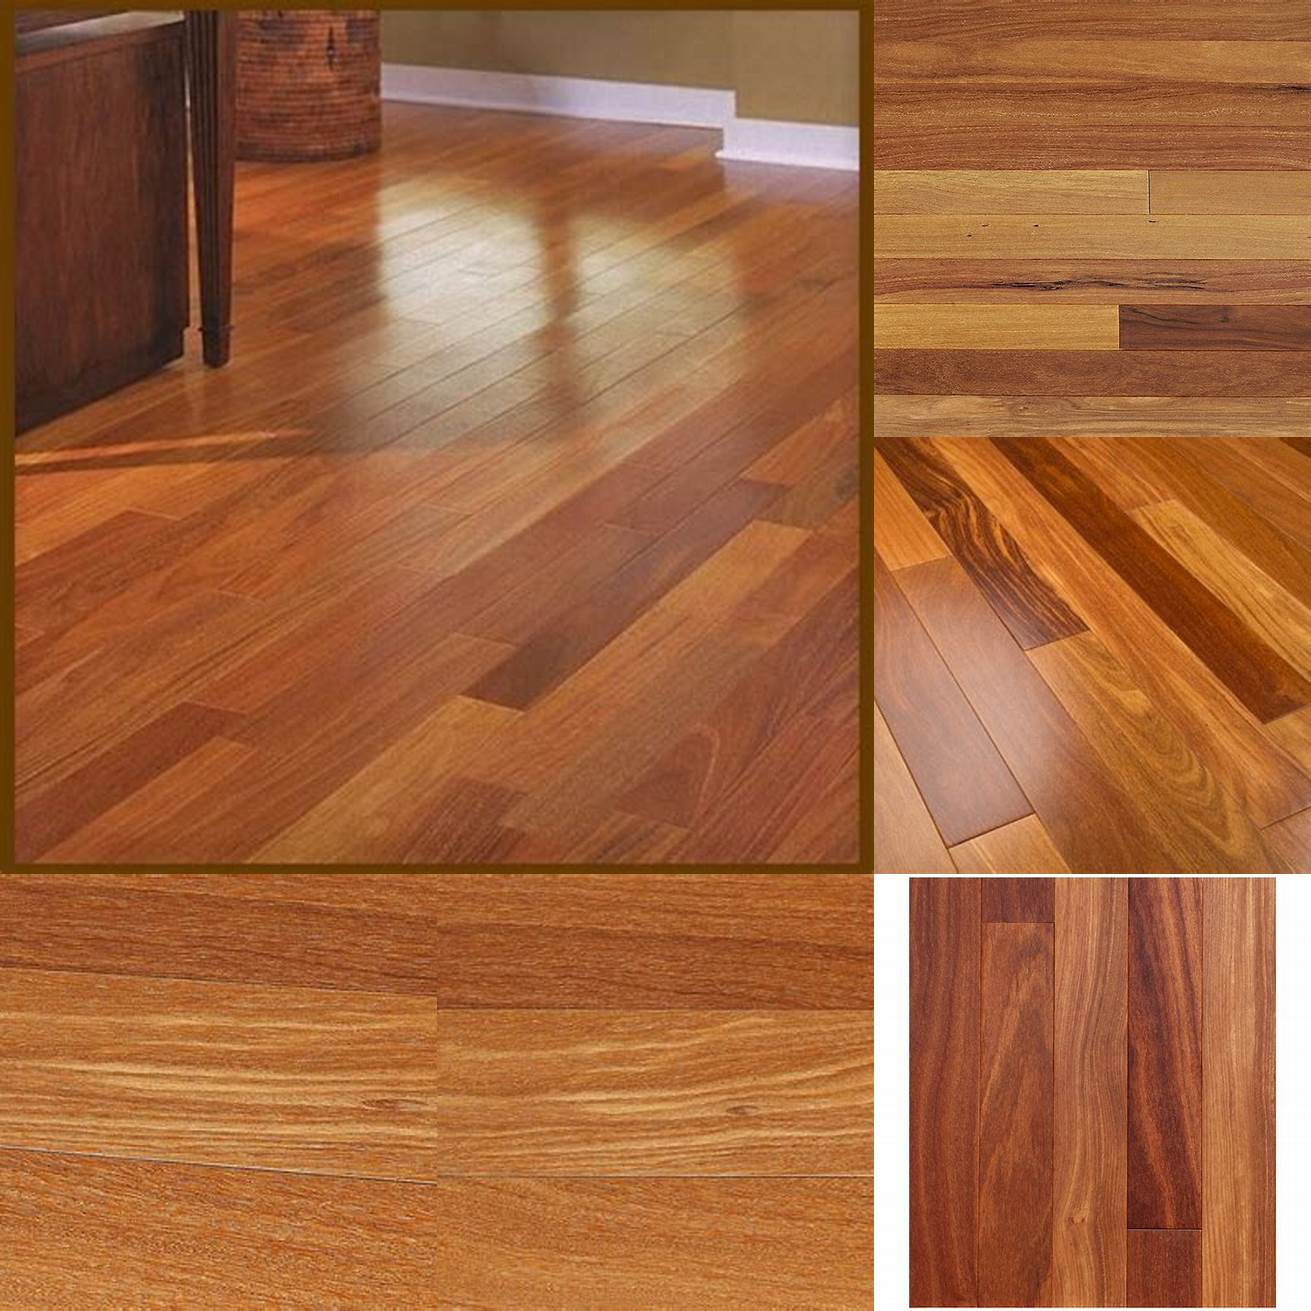 Teak Teak is a hardwood that is known for its durability and resistance to moisture It has a rich dark color that can add an elegant touch to a bathroom